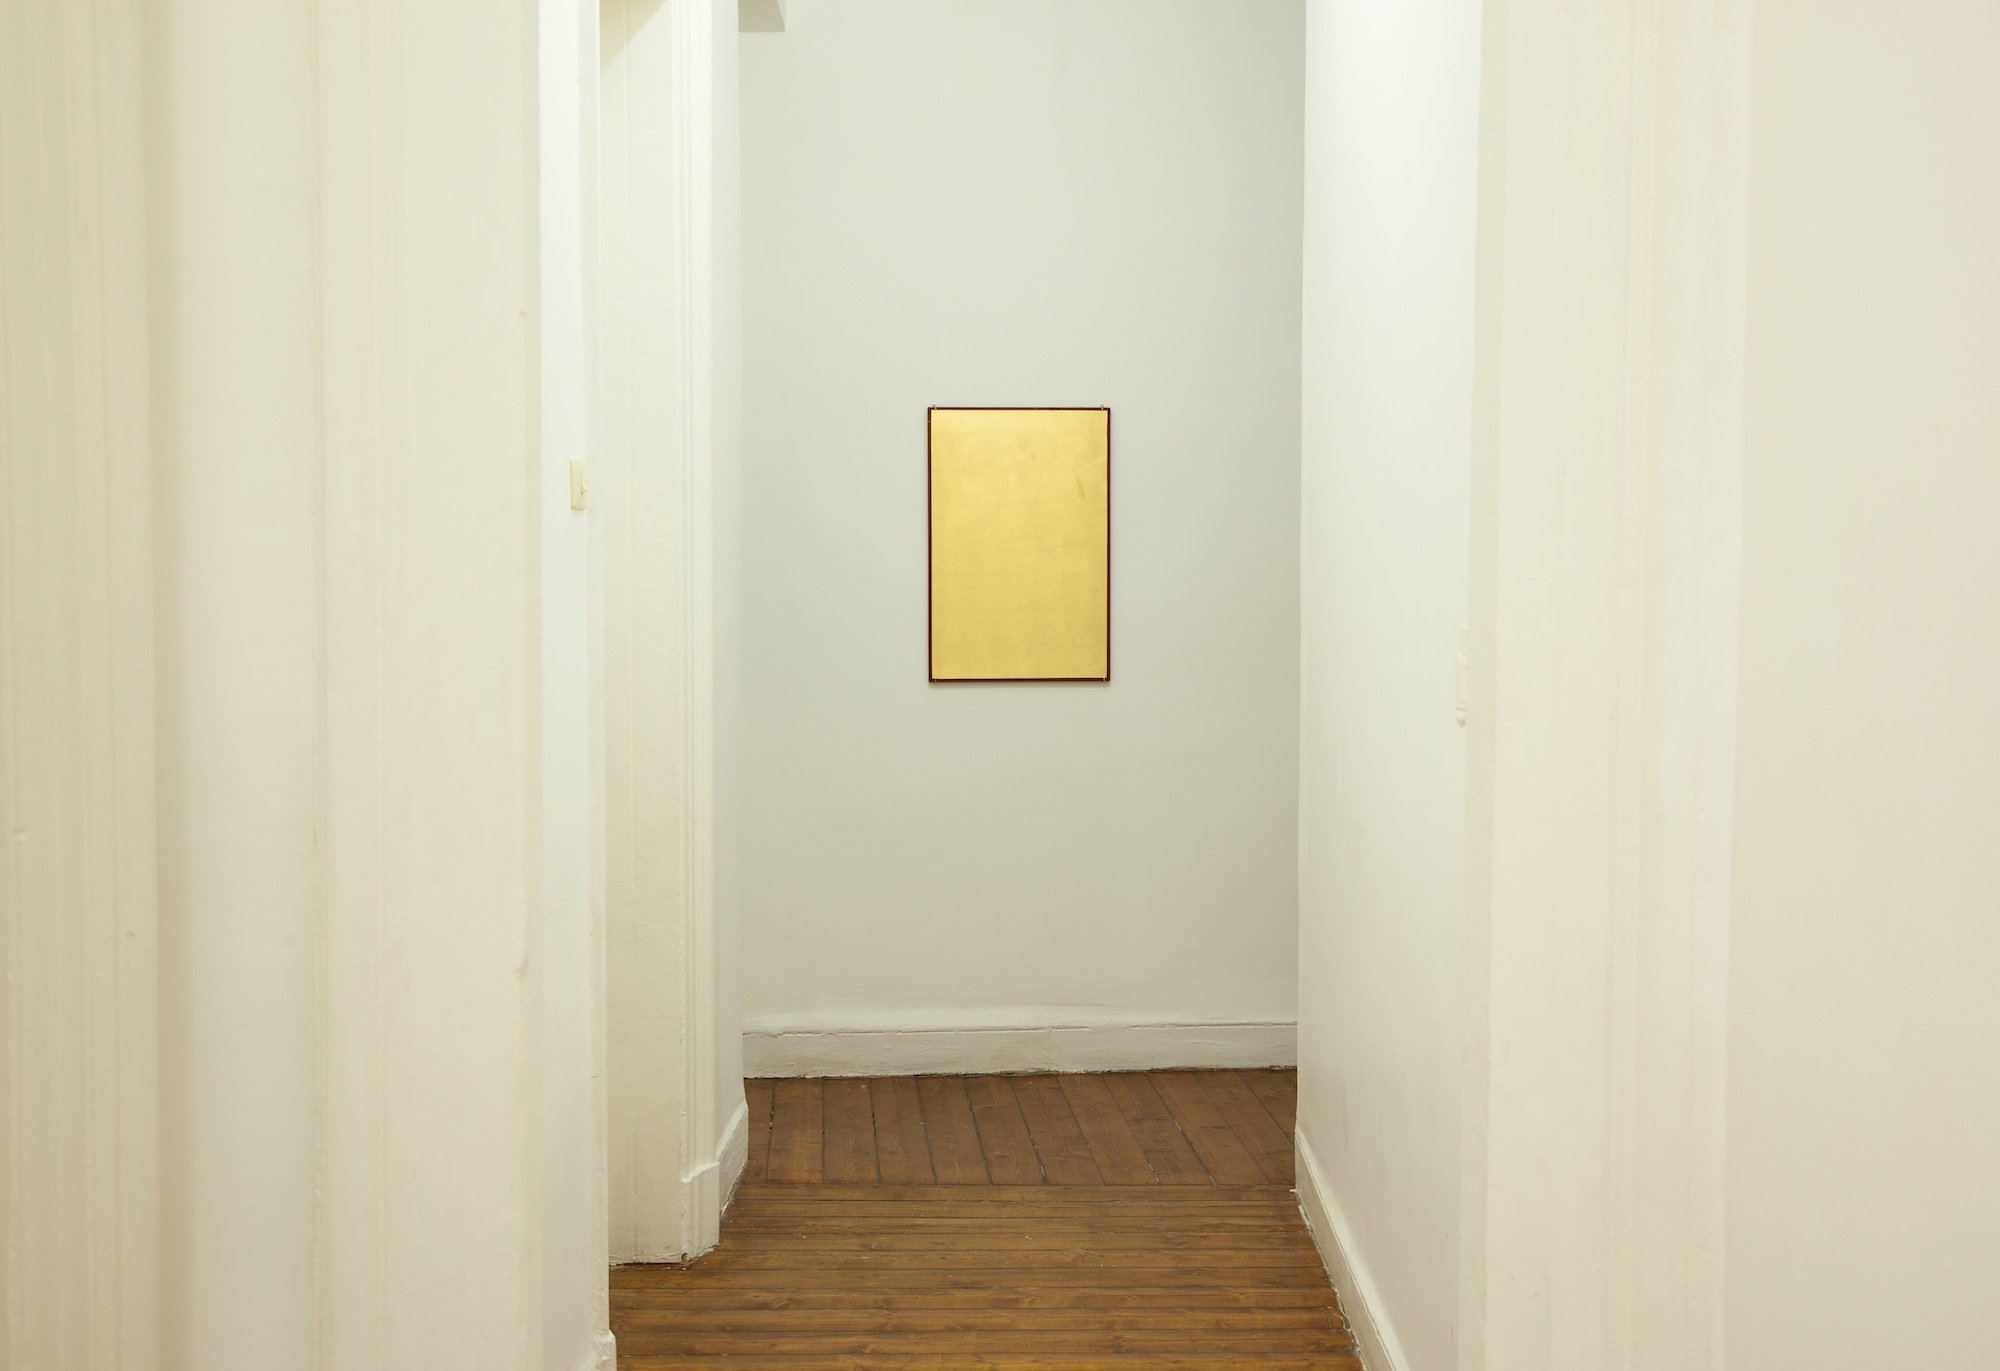 Christodoulos Panayiotou, Untitled, painting and gold on wood, 50 x 75 cm (19 3/4 x 29 1/2 in), 2012